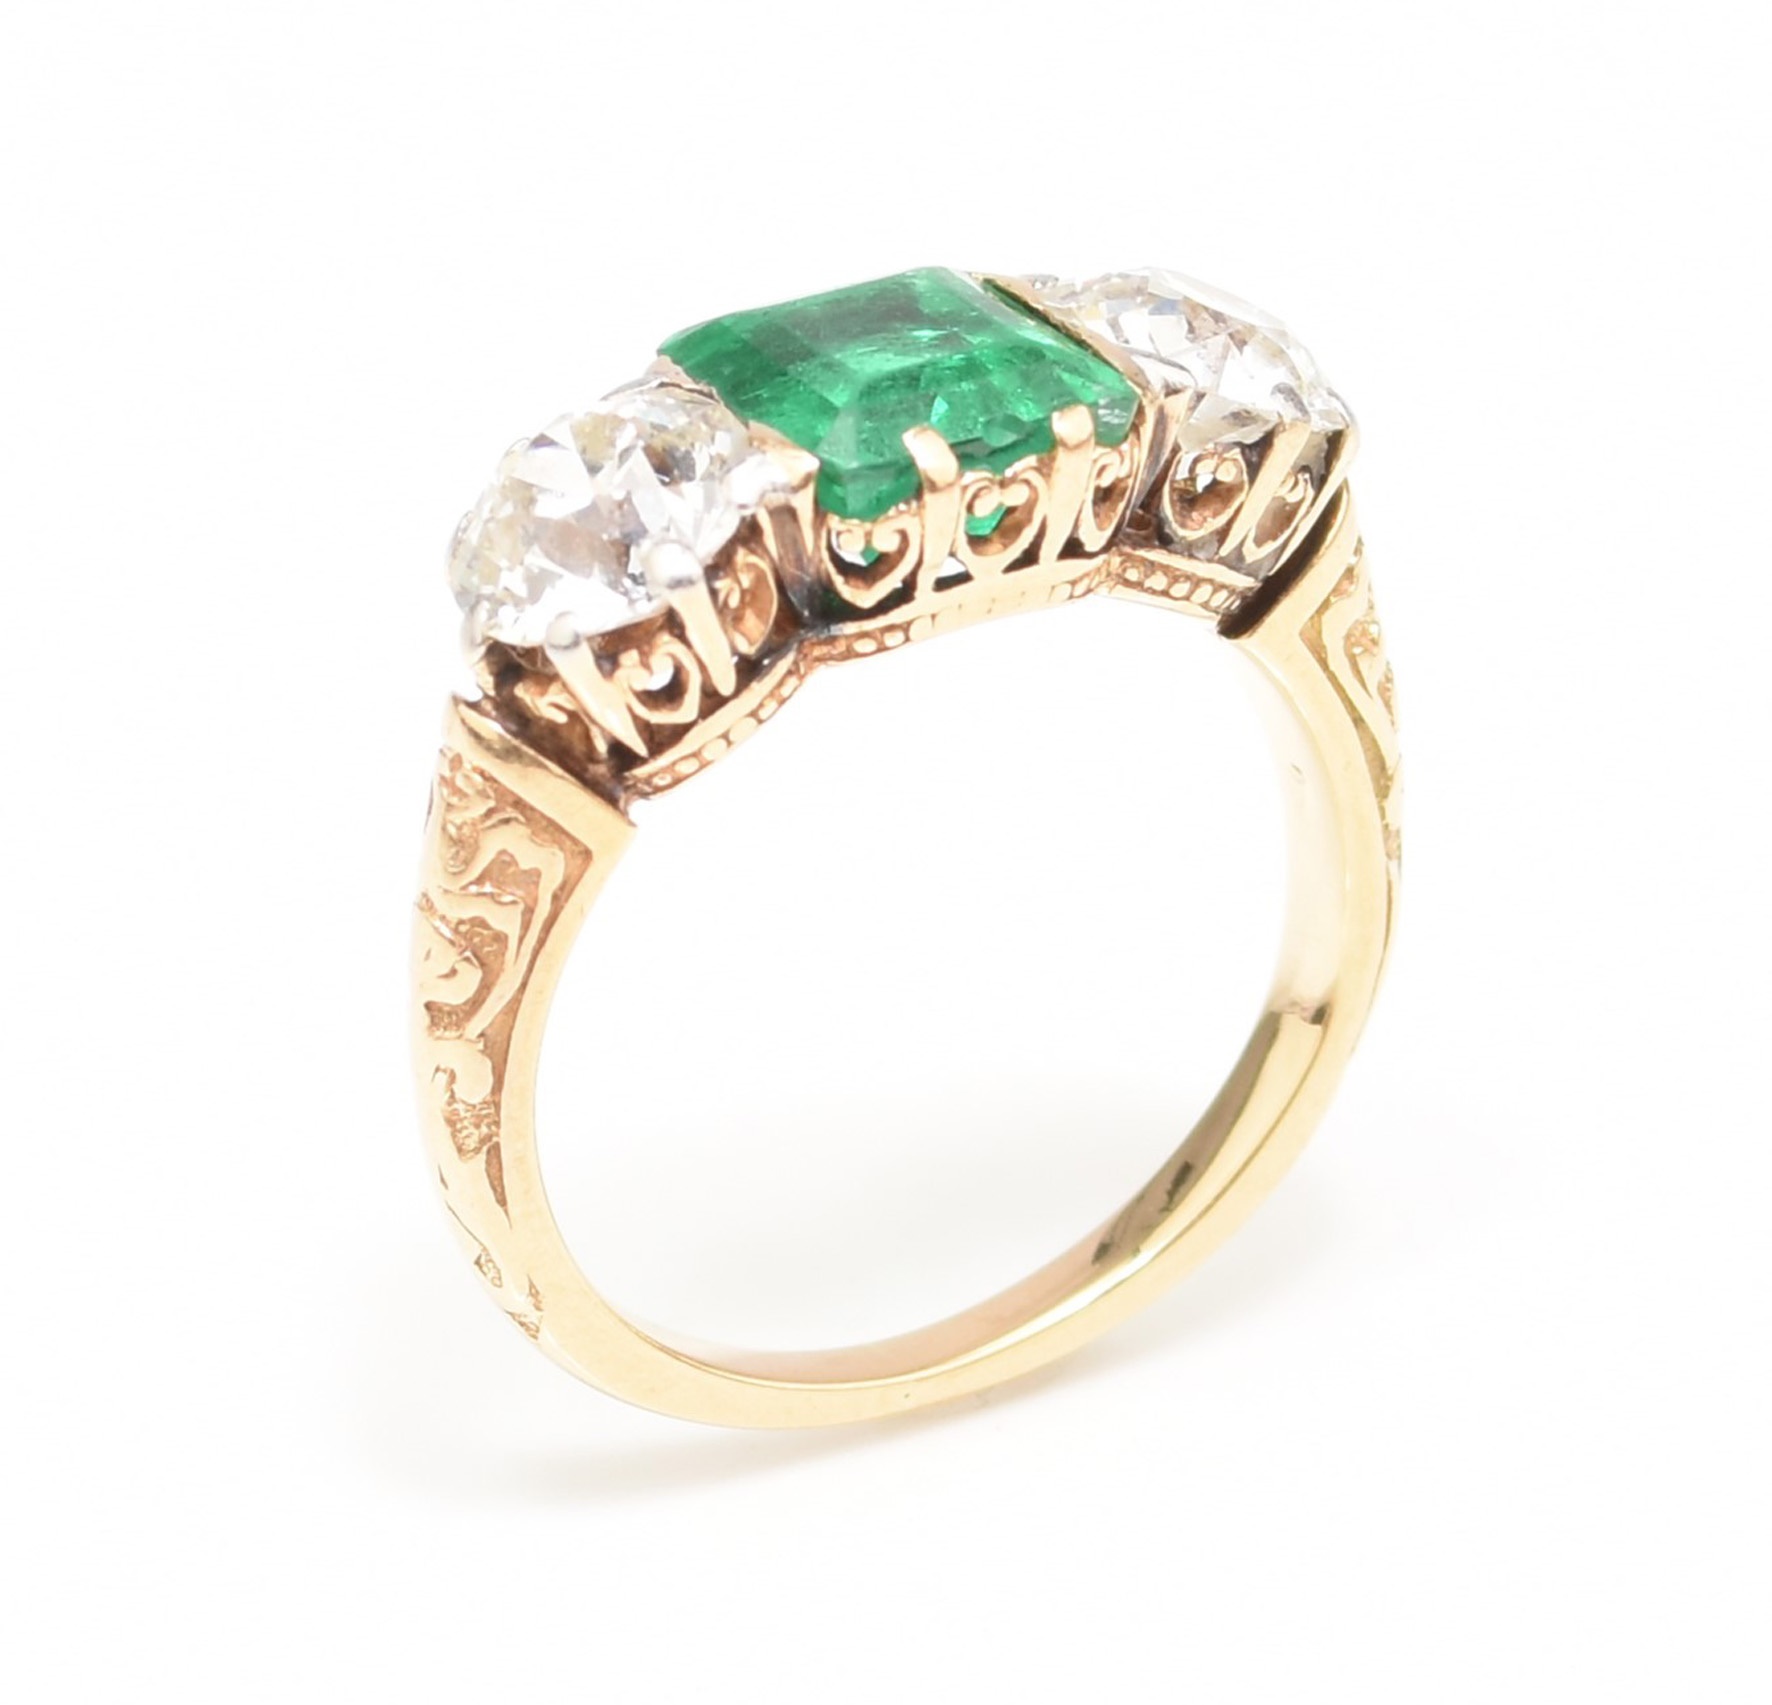 The three stone emerald and diamond ring that sold for £10,000.